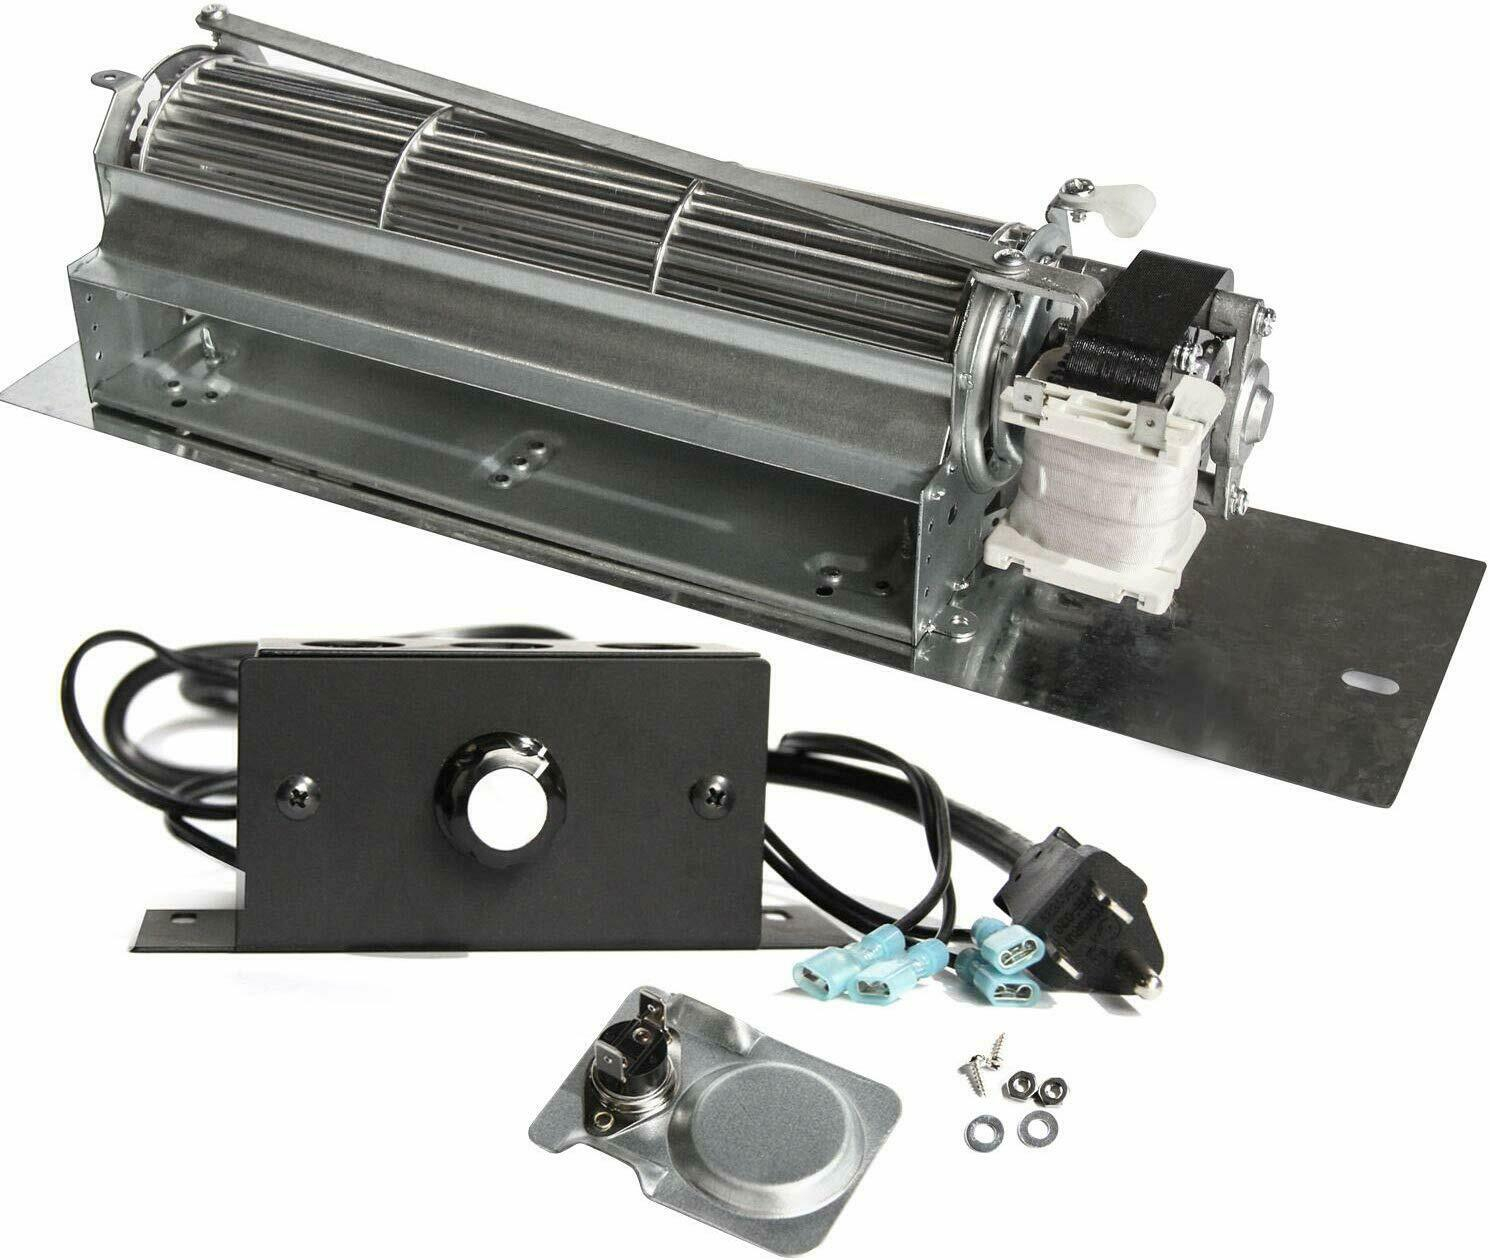 Fk24 Fireplace Blower Fan Kit For Majestic Vermont Castings Northern Flame regarding measurements 1490 X 1260